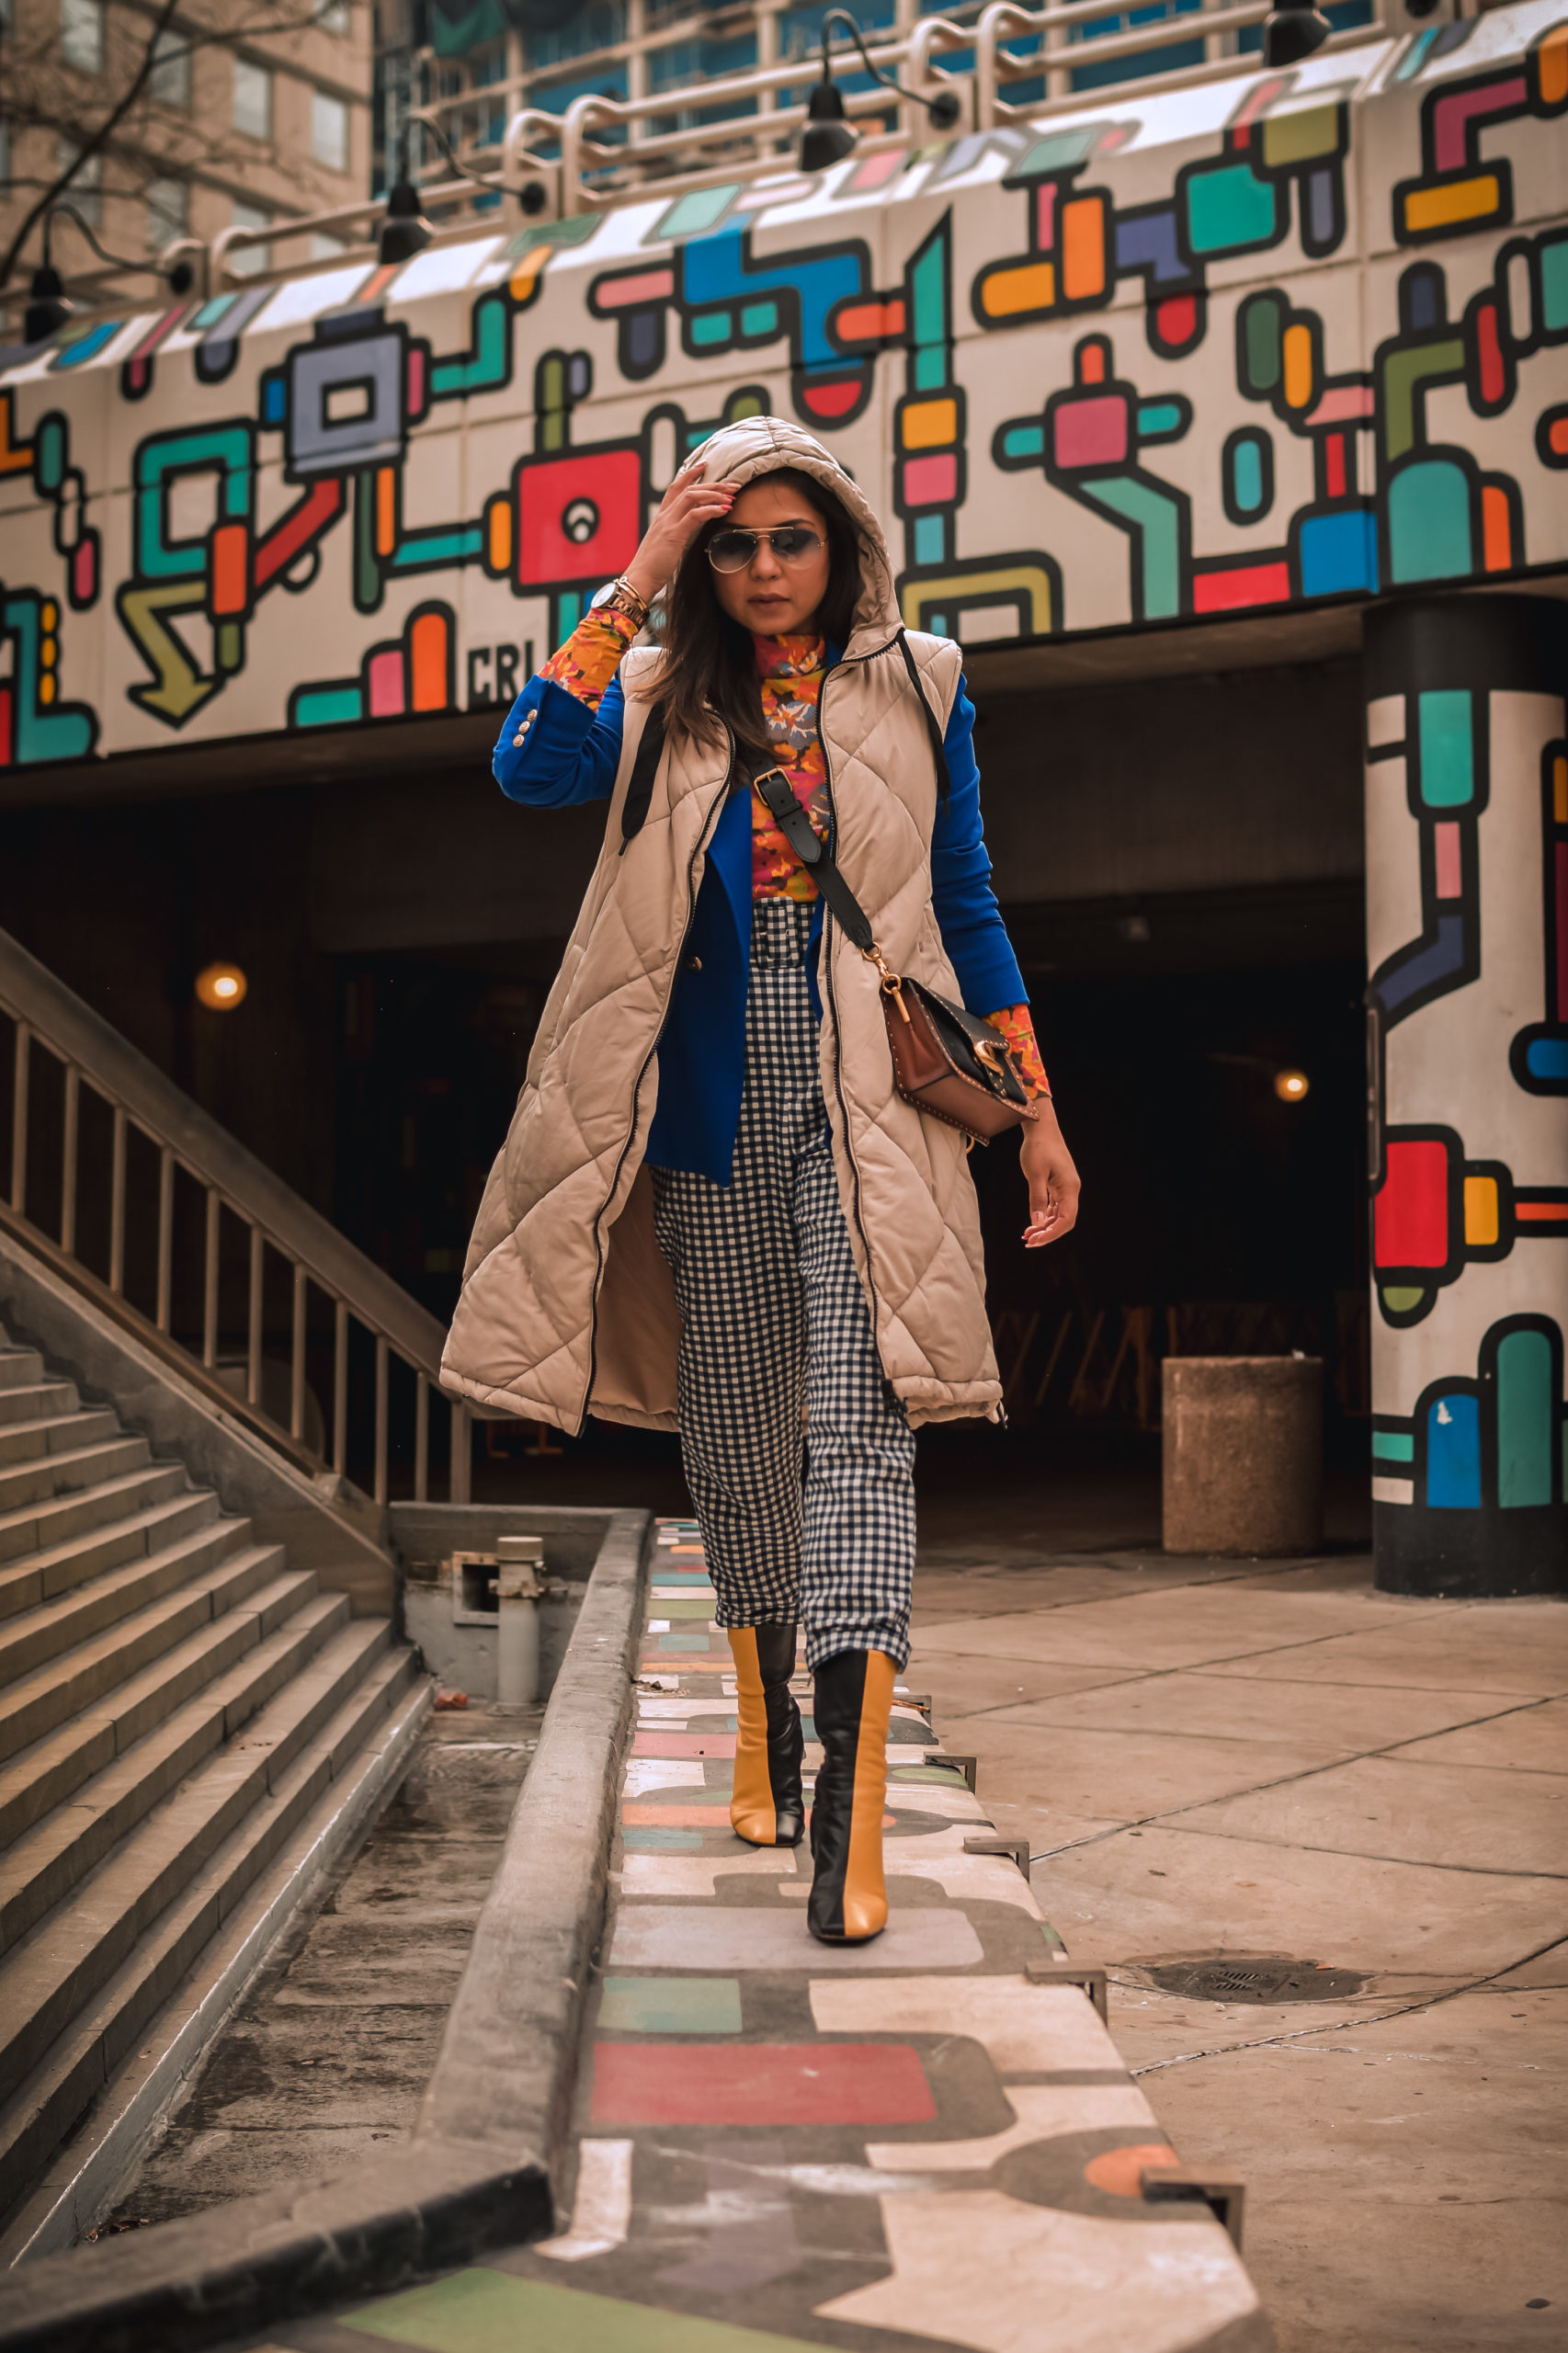 ashion trend report, trends to welcome in 2021, I am wearing a pair of gingham pants, blue blazer, orange printed turtleneck, a quilted puffer vest and colorblock boots, Zara mania, myriad musings, saumya shiohare 